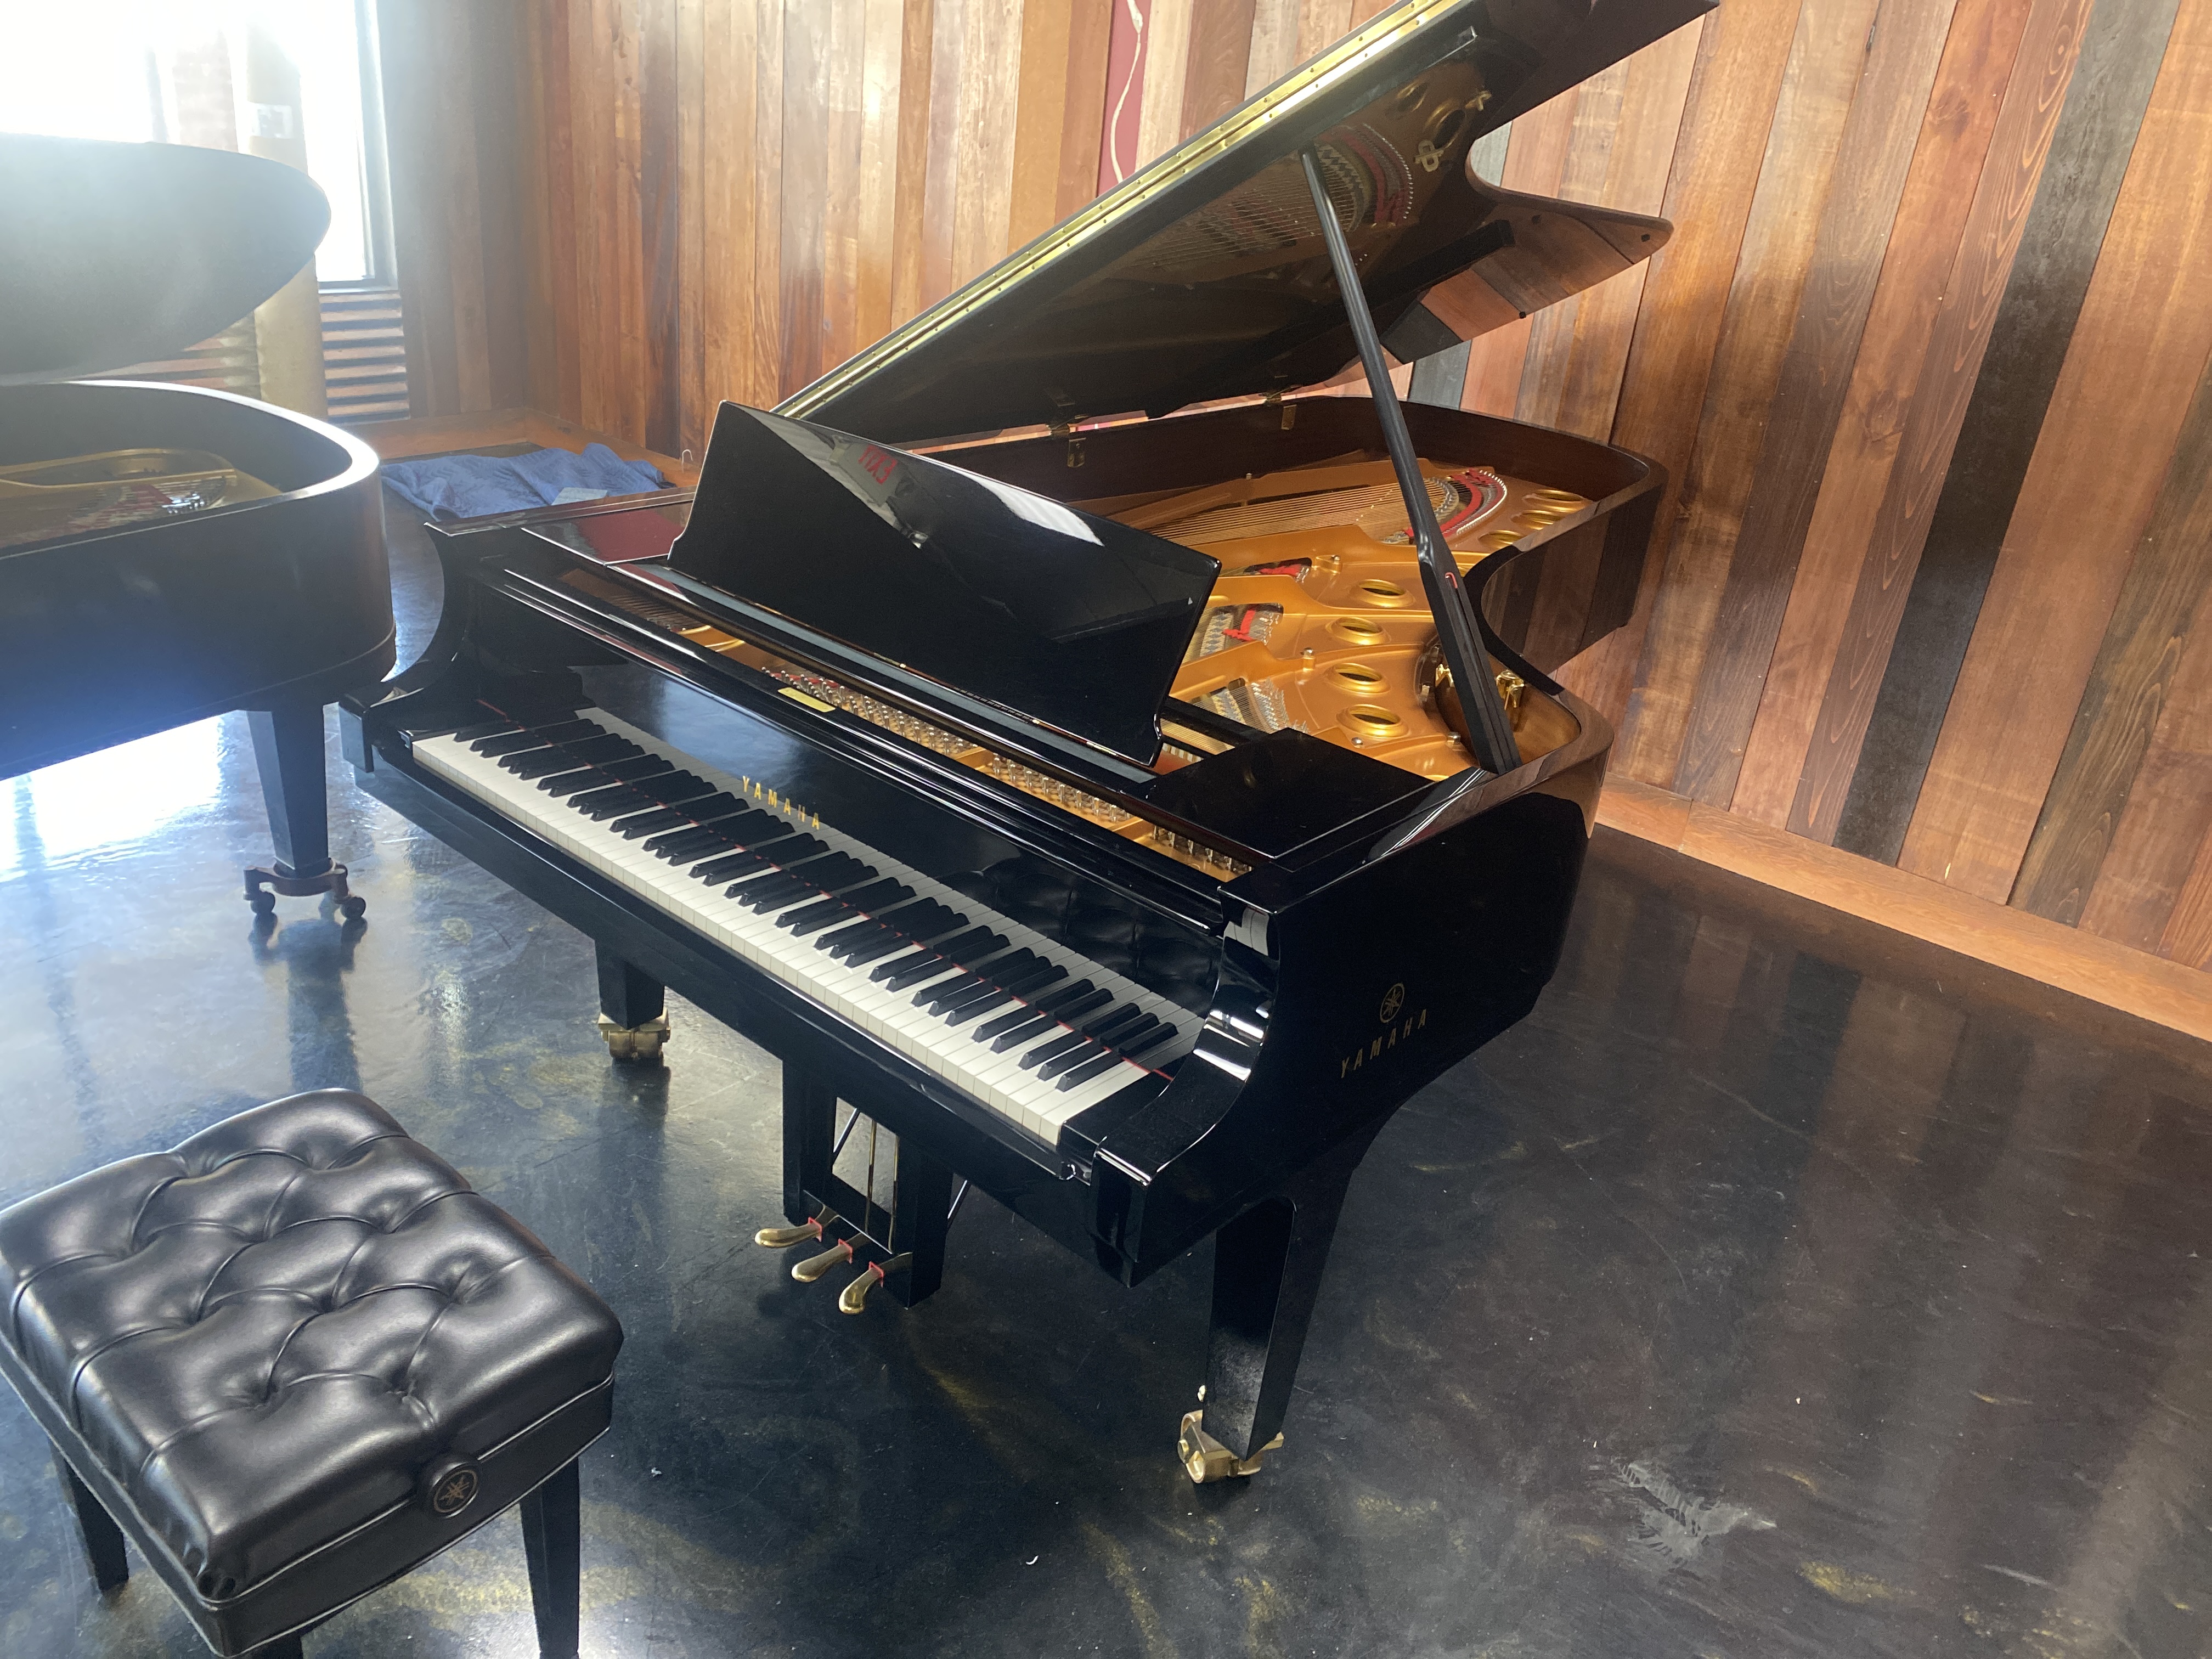 2016 YAMAHA CFX CONCERT GRAND PIANO  LIKE NEW. FREE DELIVERY